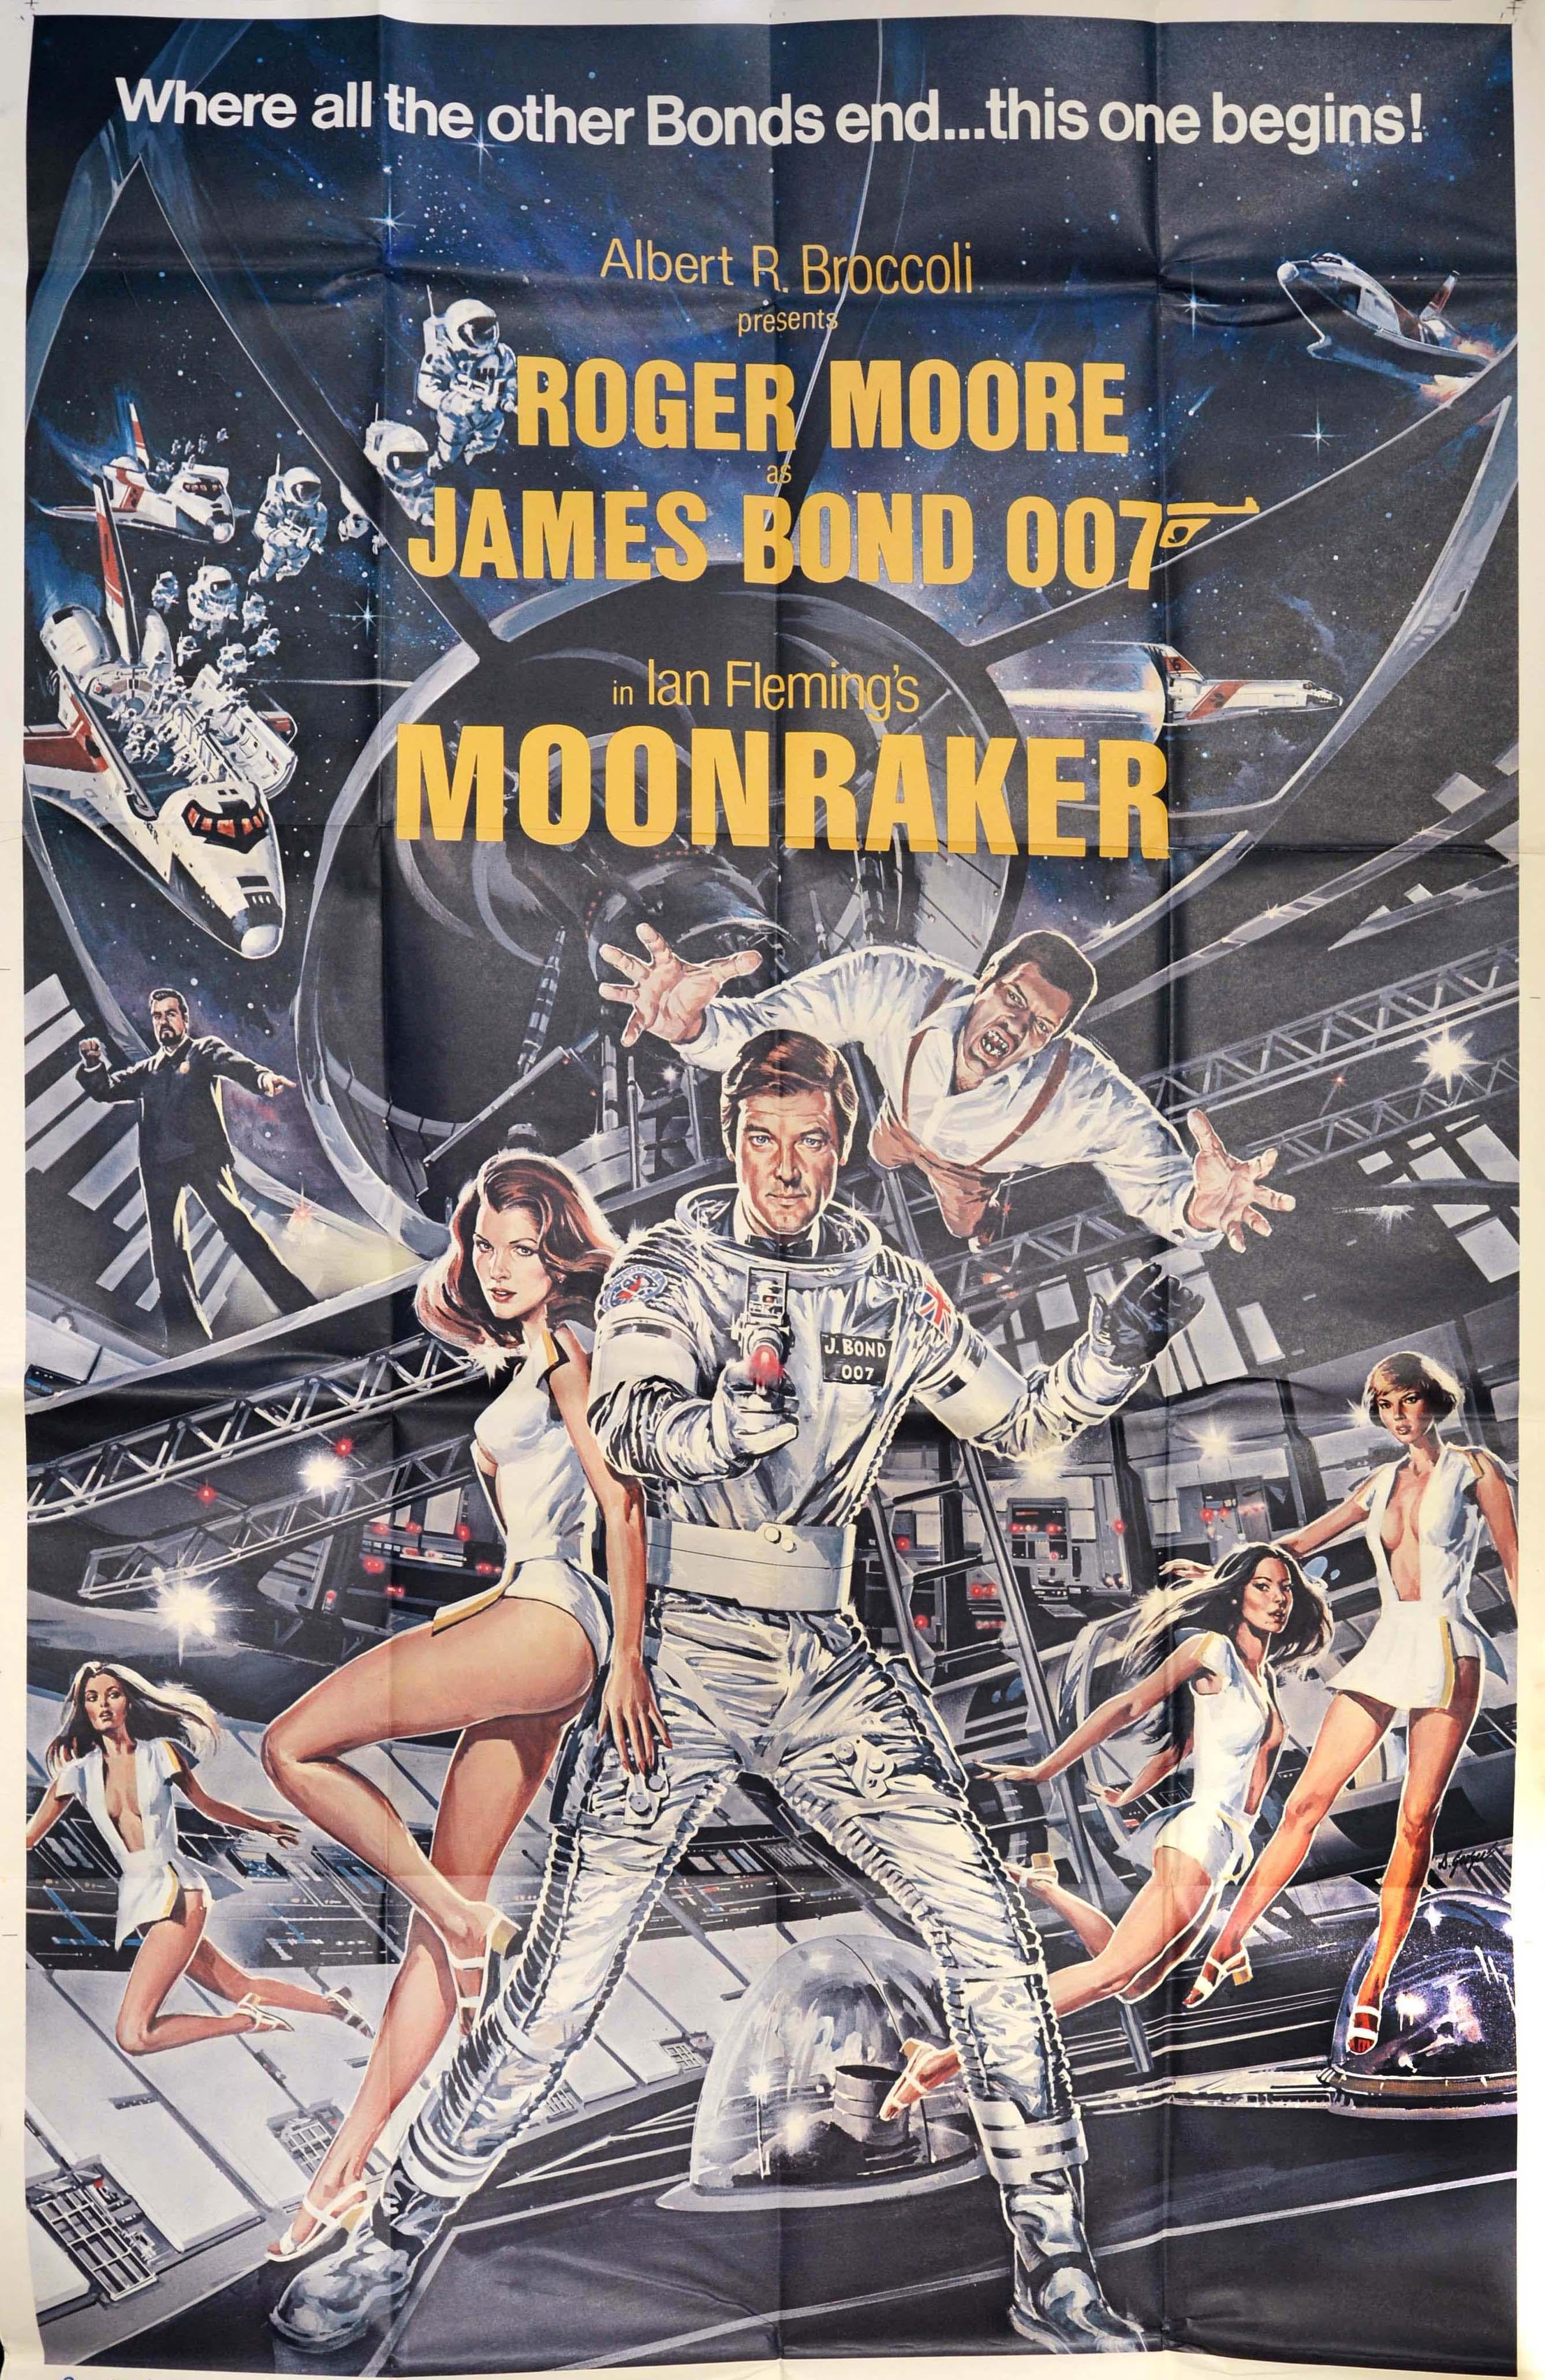 Original vintage cinema poster for the 007 James Bond movie Moonraker starring Roger Moore in the lead role, Lois Chiles as Holly Goodhead, Michael Lonsdale as Hugo Drax and Richard Kiel as Jaws - Where all the other Bonds end... this one begins! -